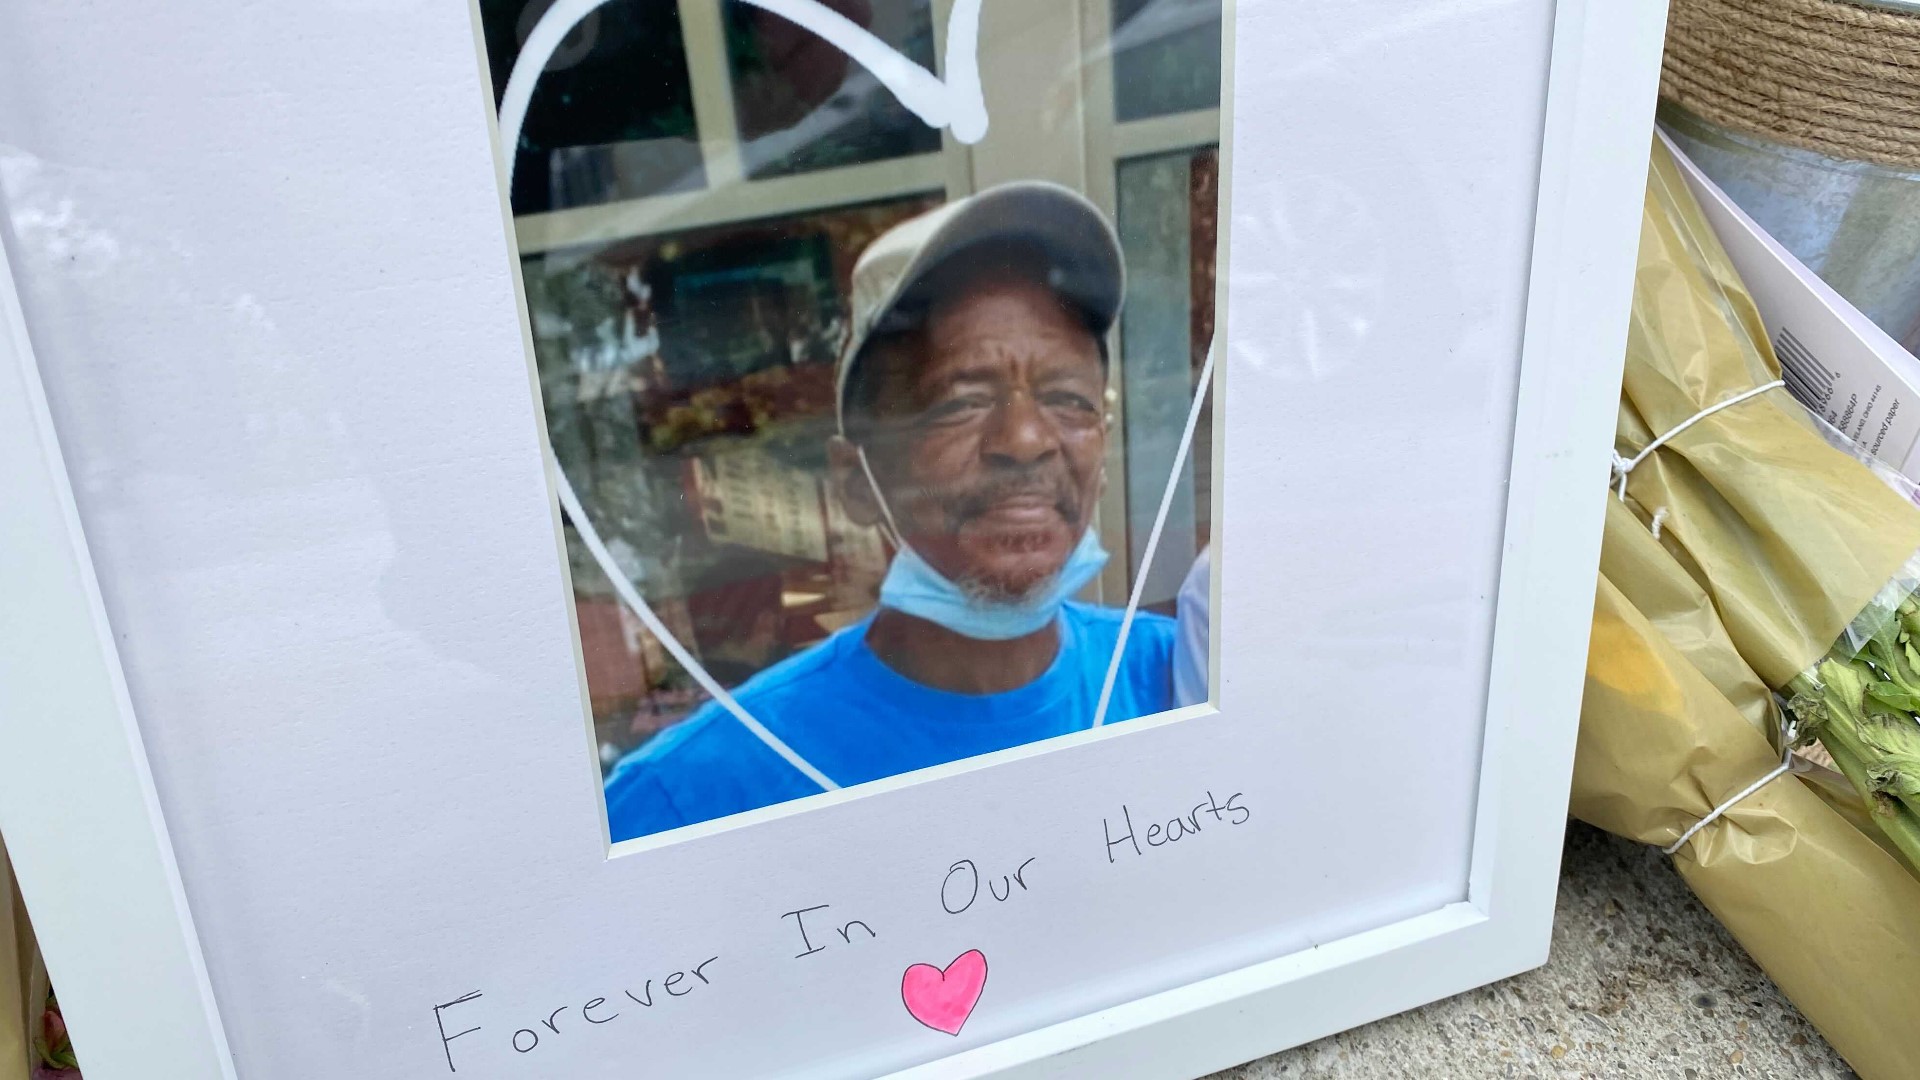 Curtis Cunningham was a fixture at the corner of North High Street and West 18th Avenue, just outside Buckeye Donuts, for years. He died this past weekend.